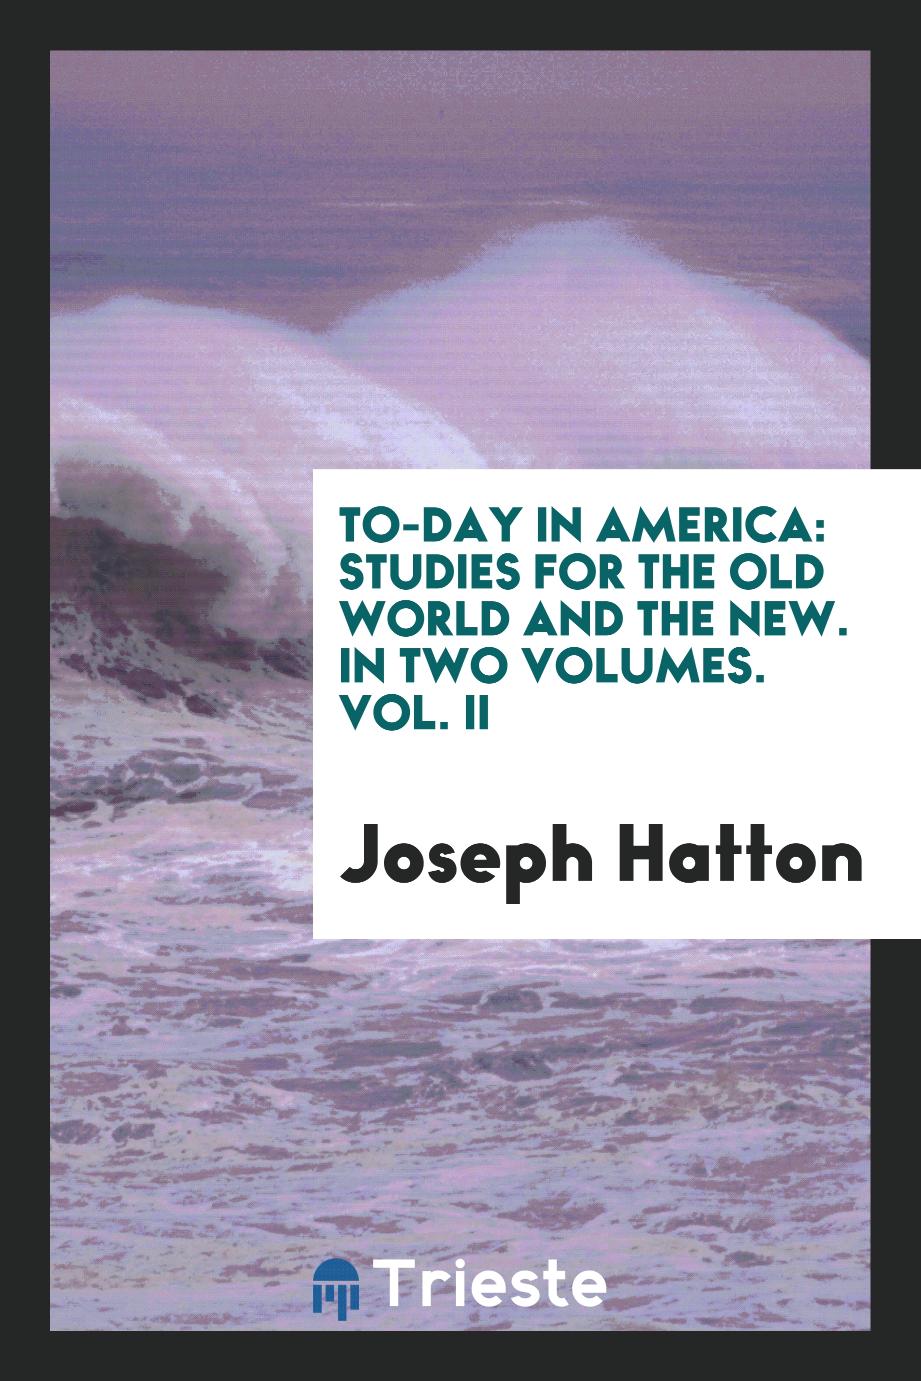 To-day in America: Studies for the Old world and the New. In Two Volumes. Vol. II